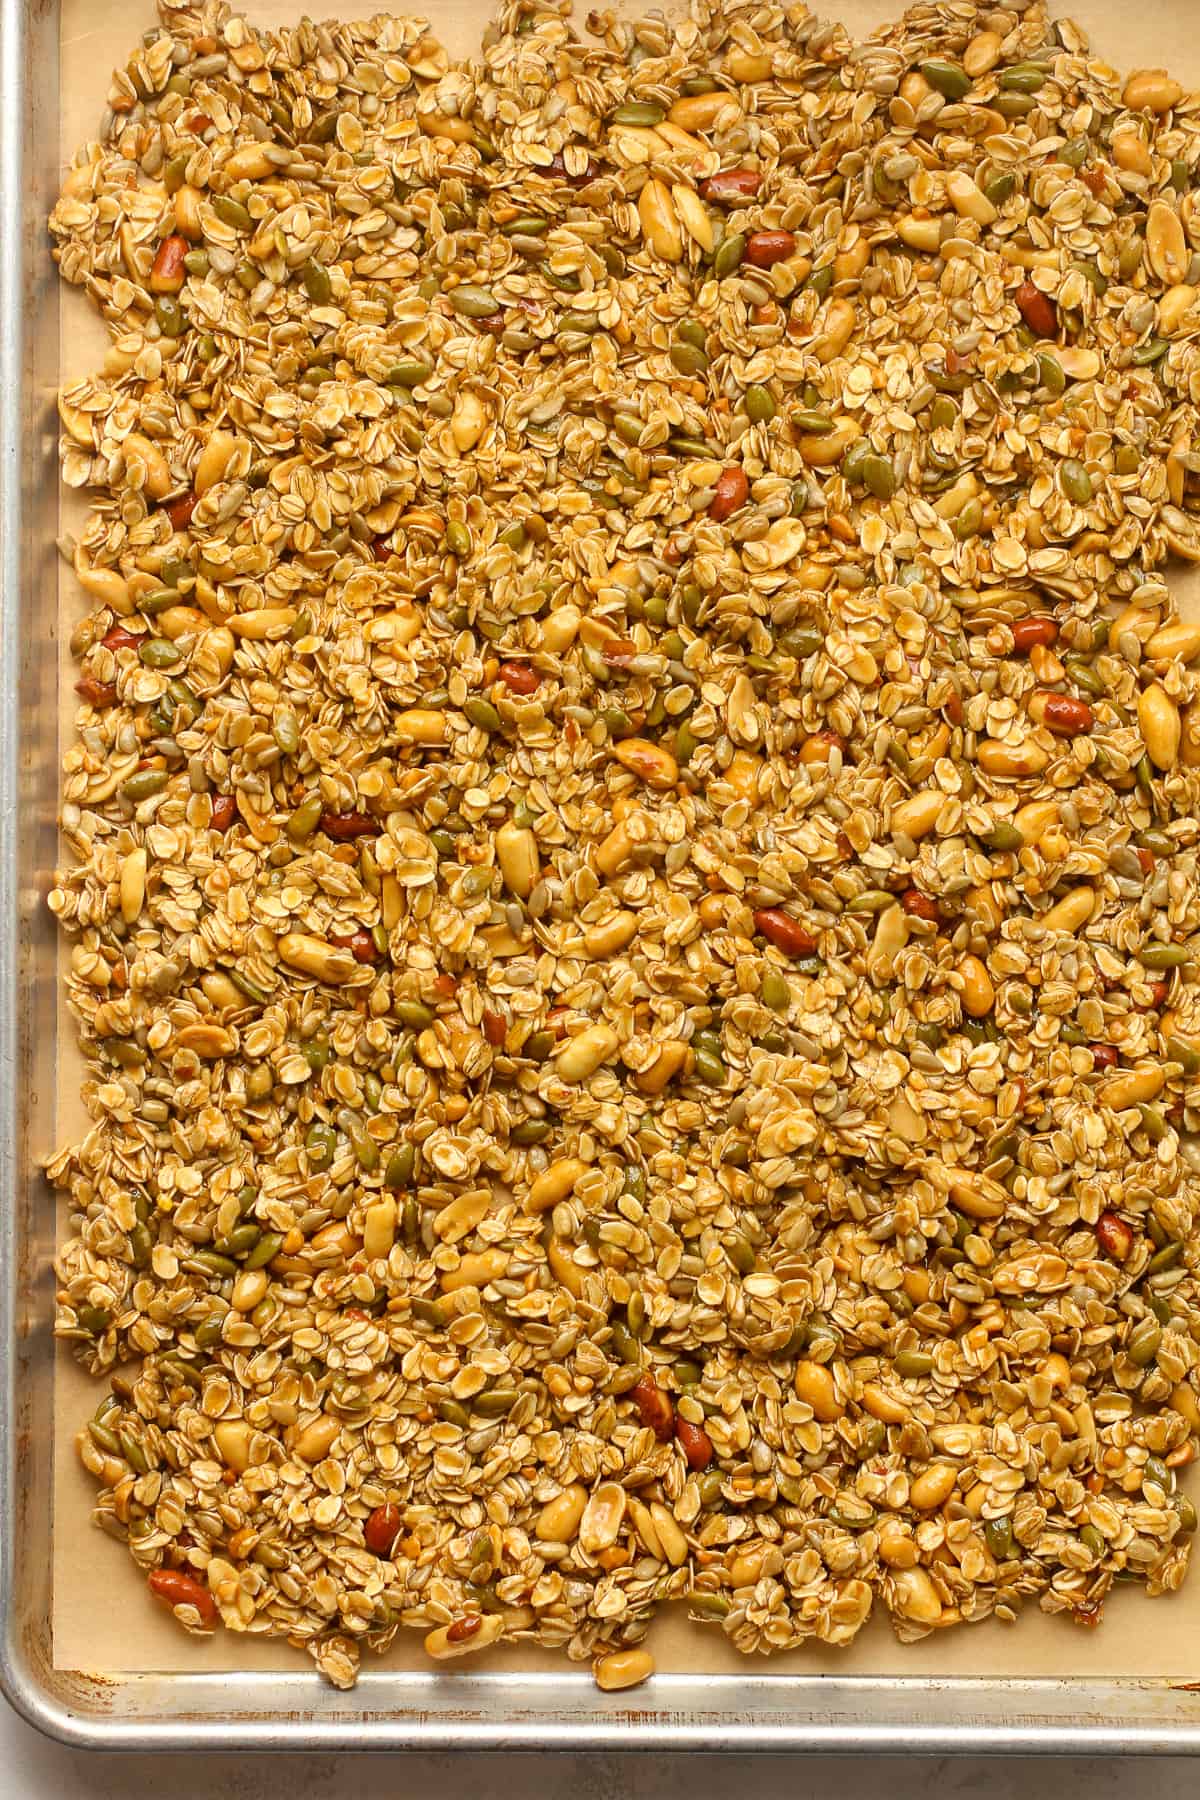 A sheet pan of the granola pressed down.